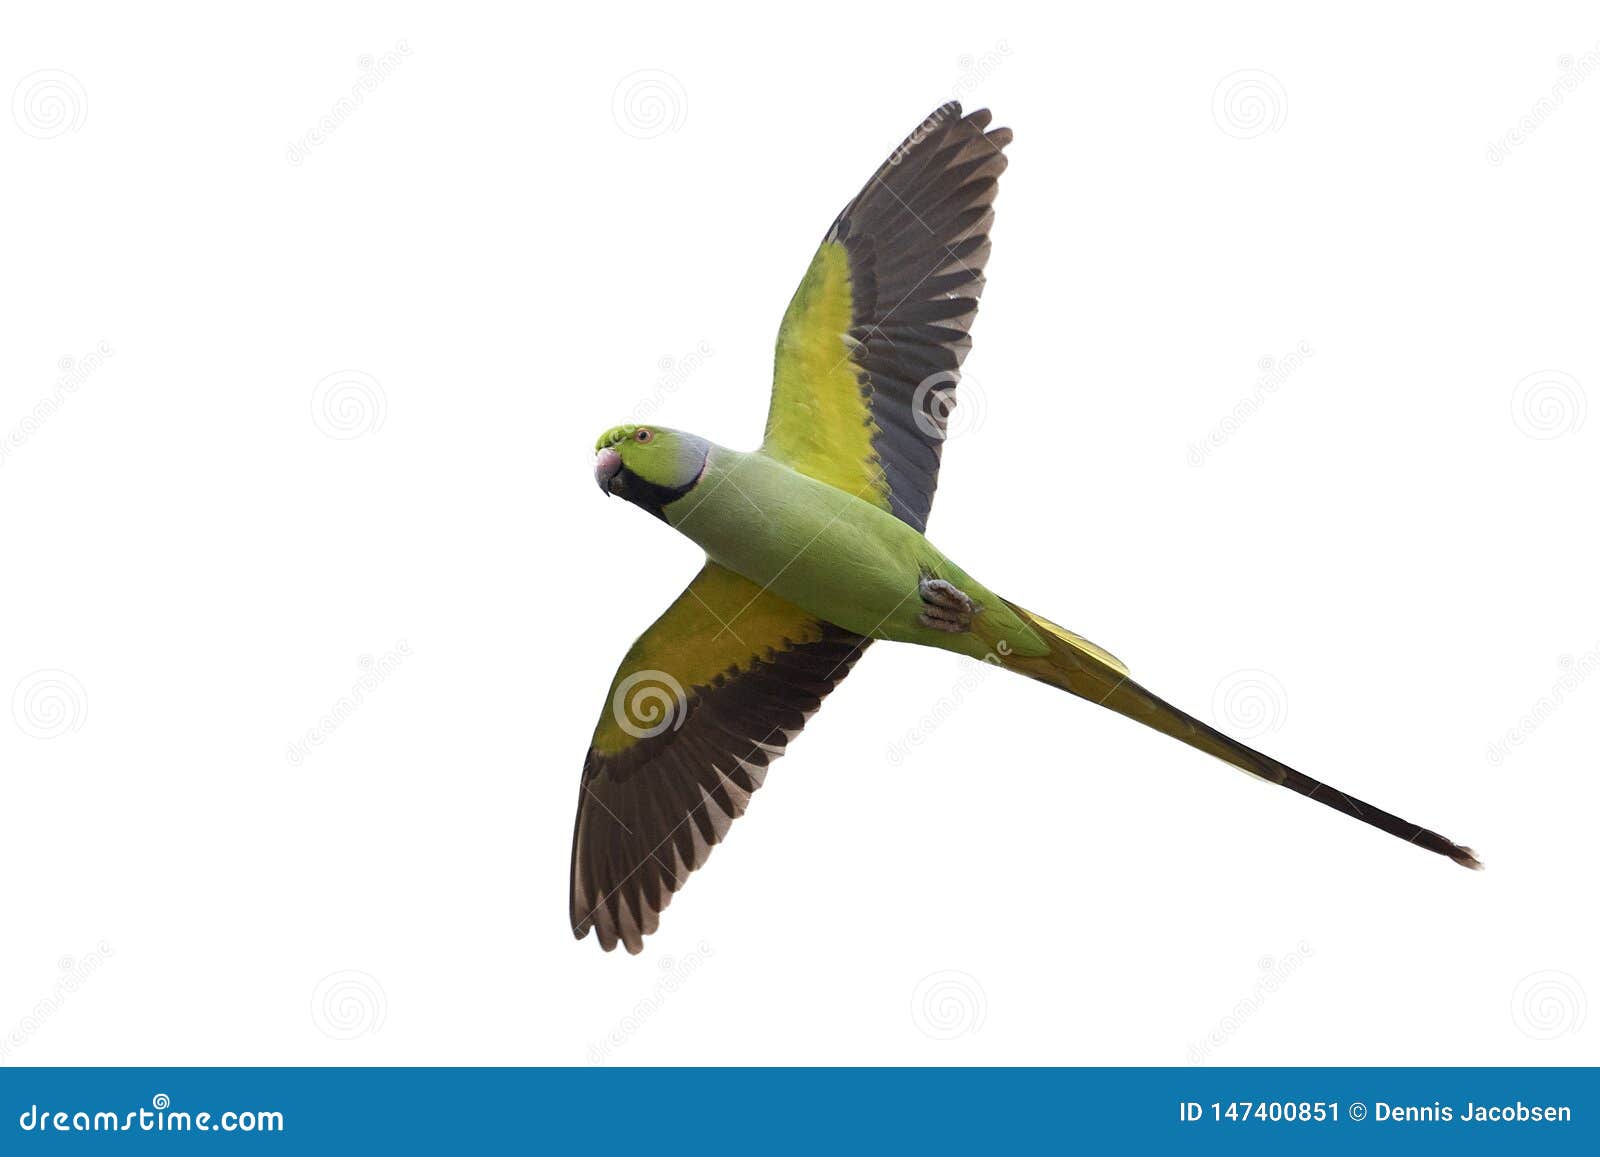 New Invasive Species, Rose-Ringed Parakeets Found on Maui : Maui Now